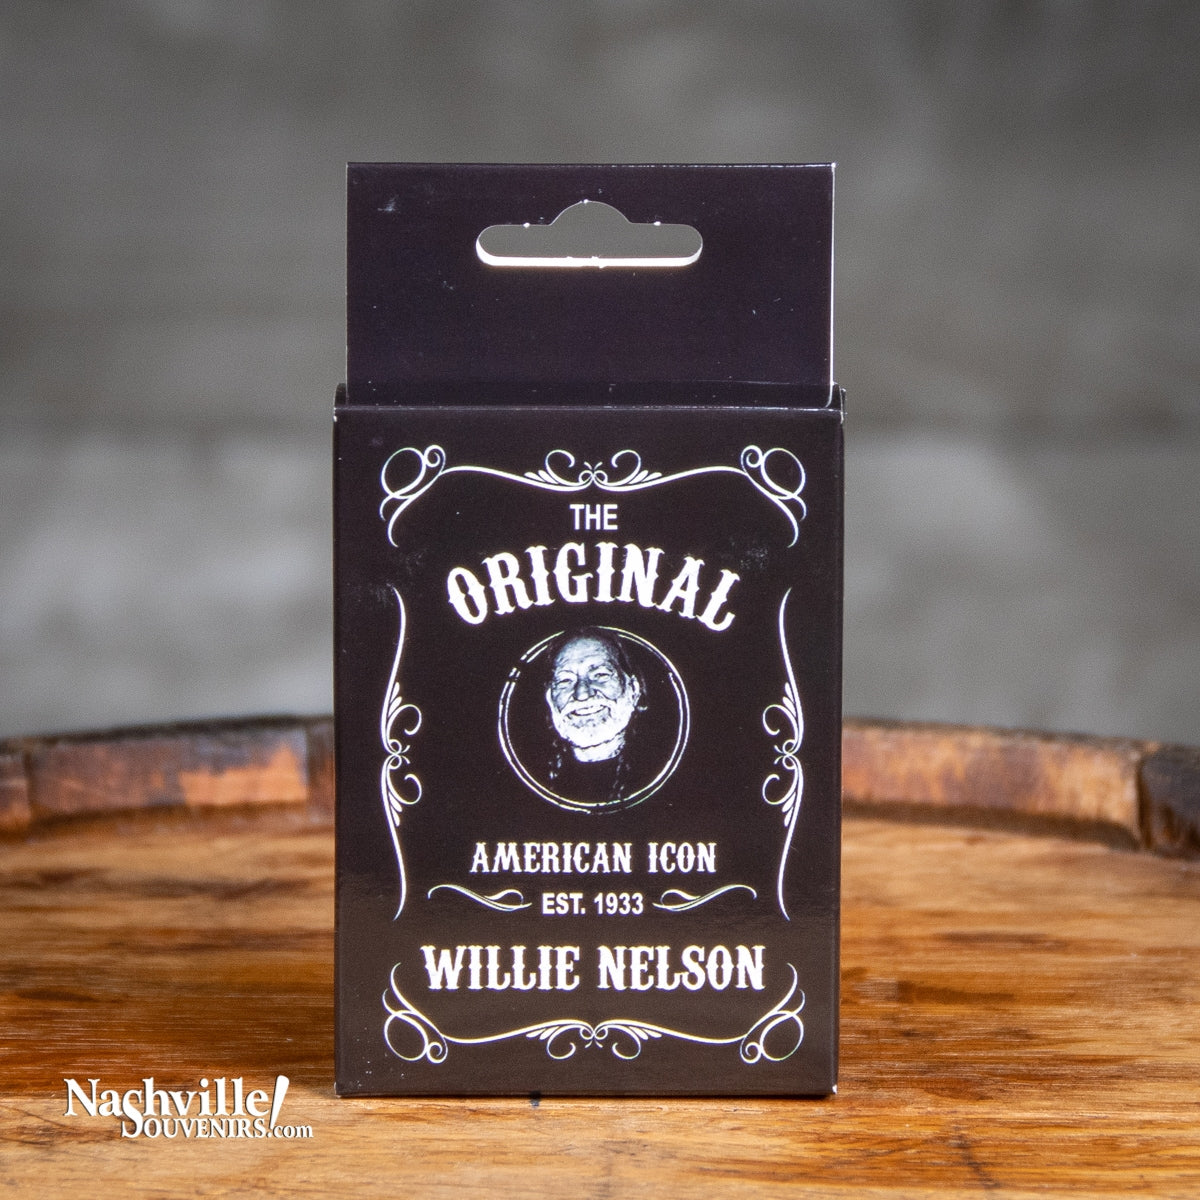 Willie Nelson American Icon Playing Cards